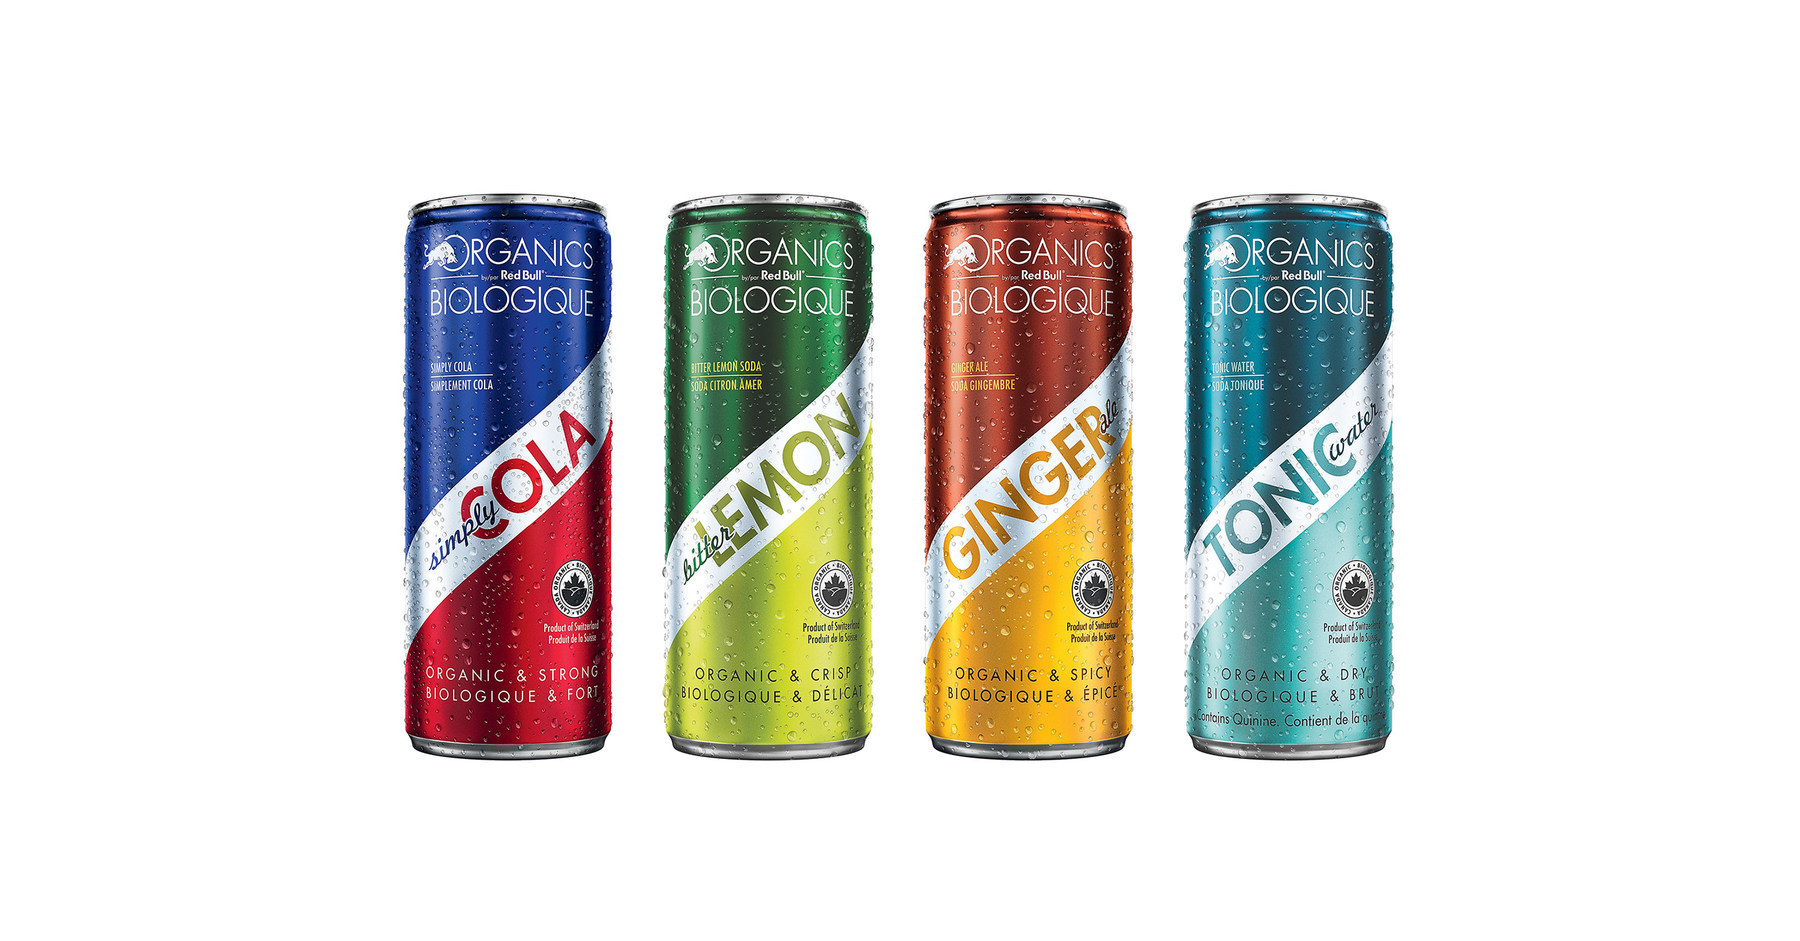 Red Bull Launches ORGANICS by Red Bull, its New Premium Range of Organic,  Carbonated Drinks in Canada